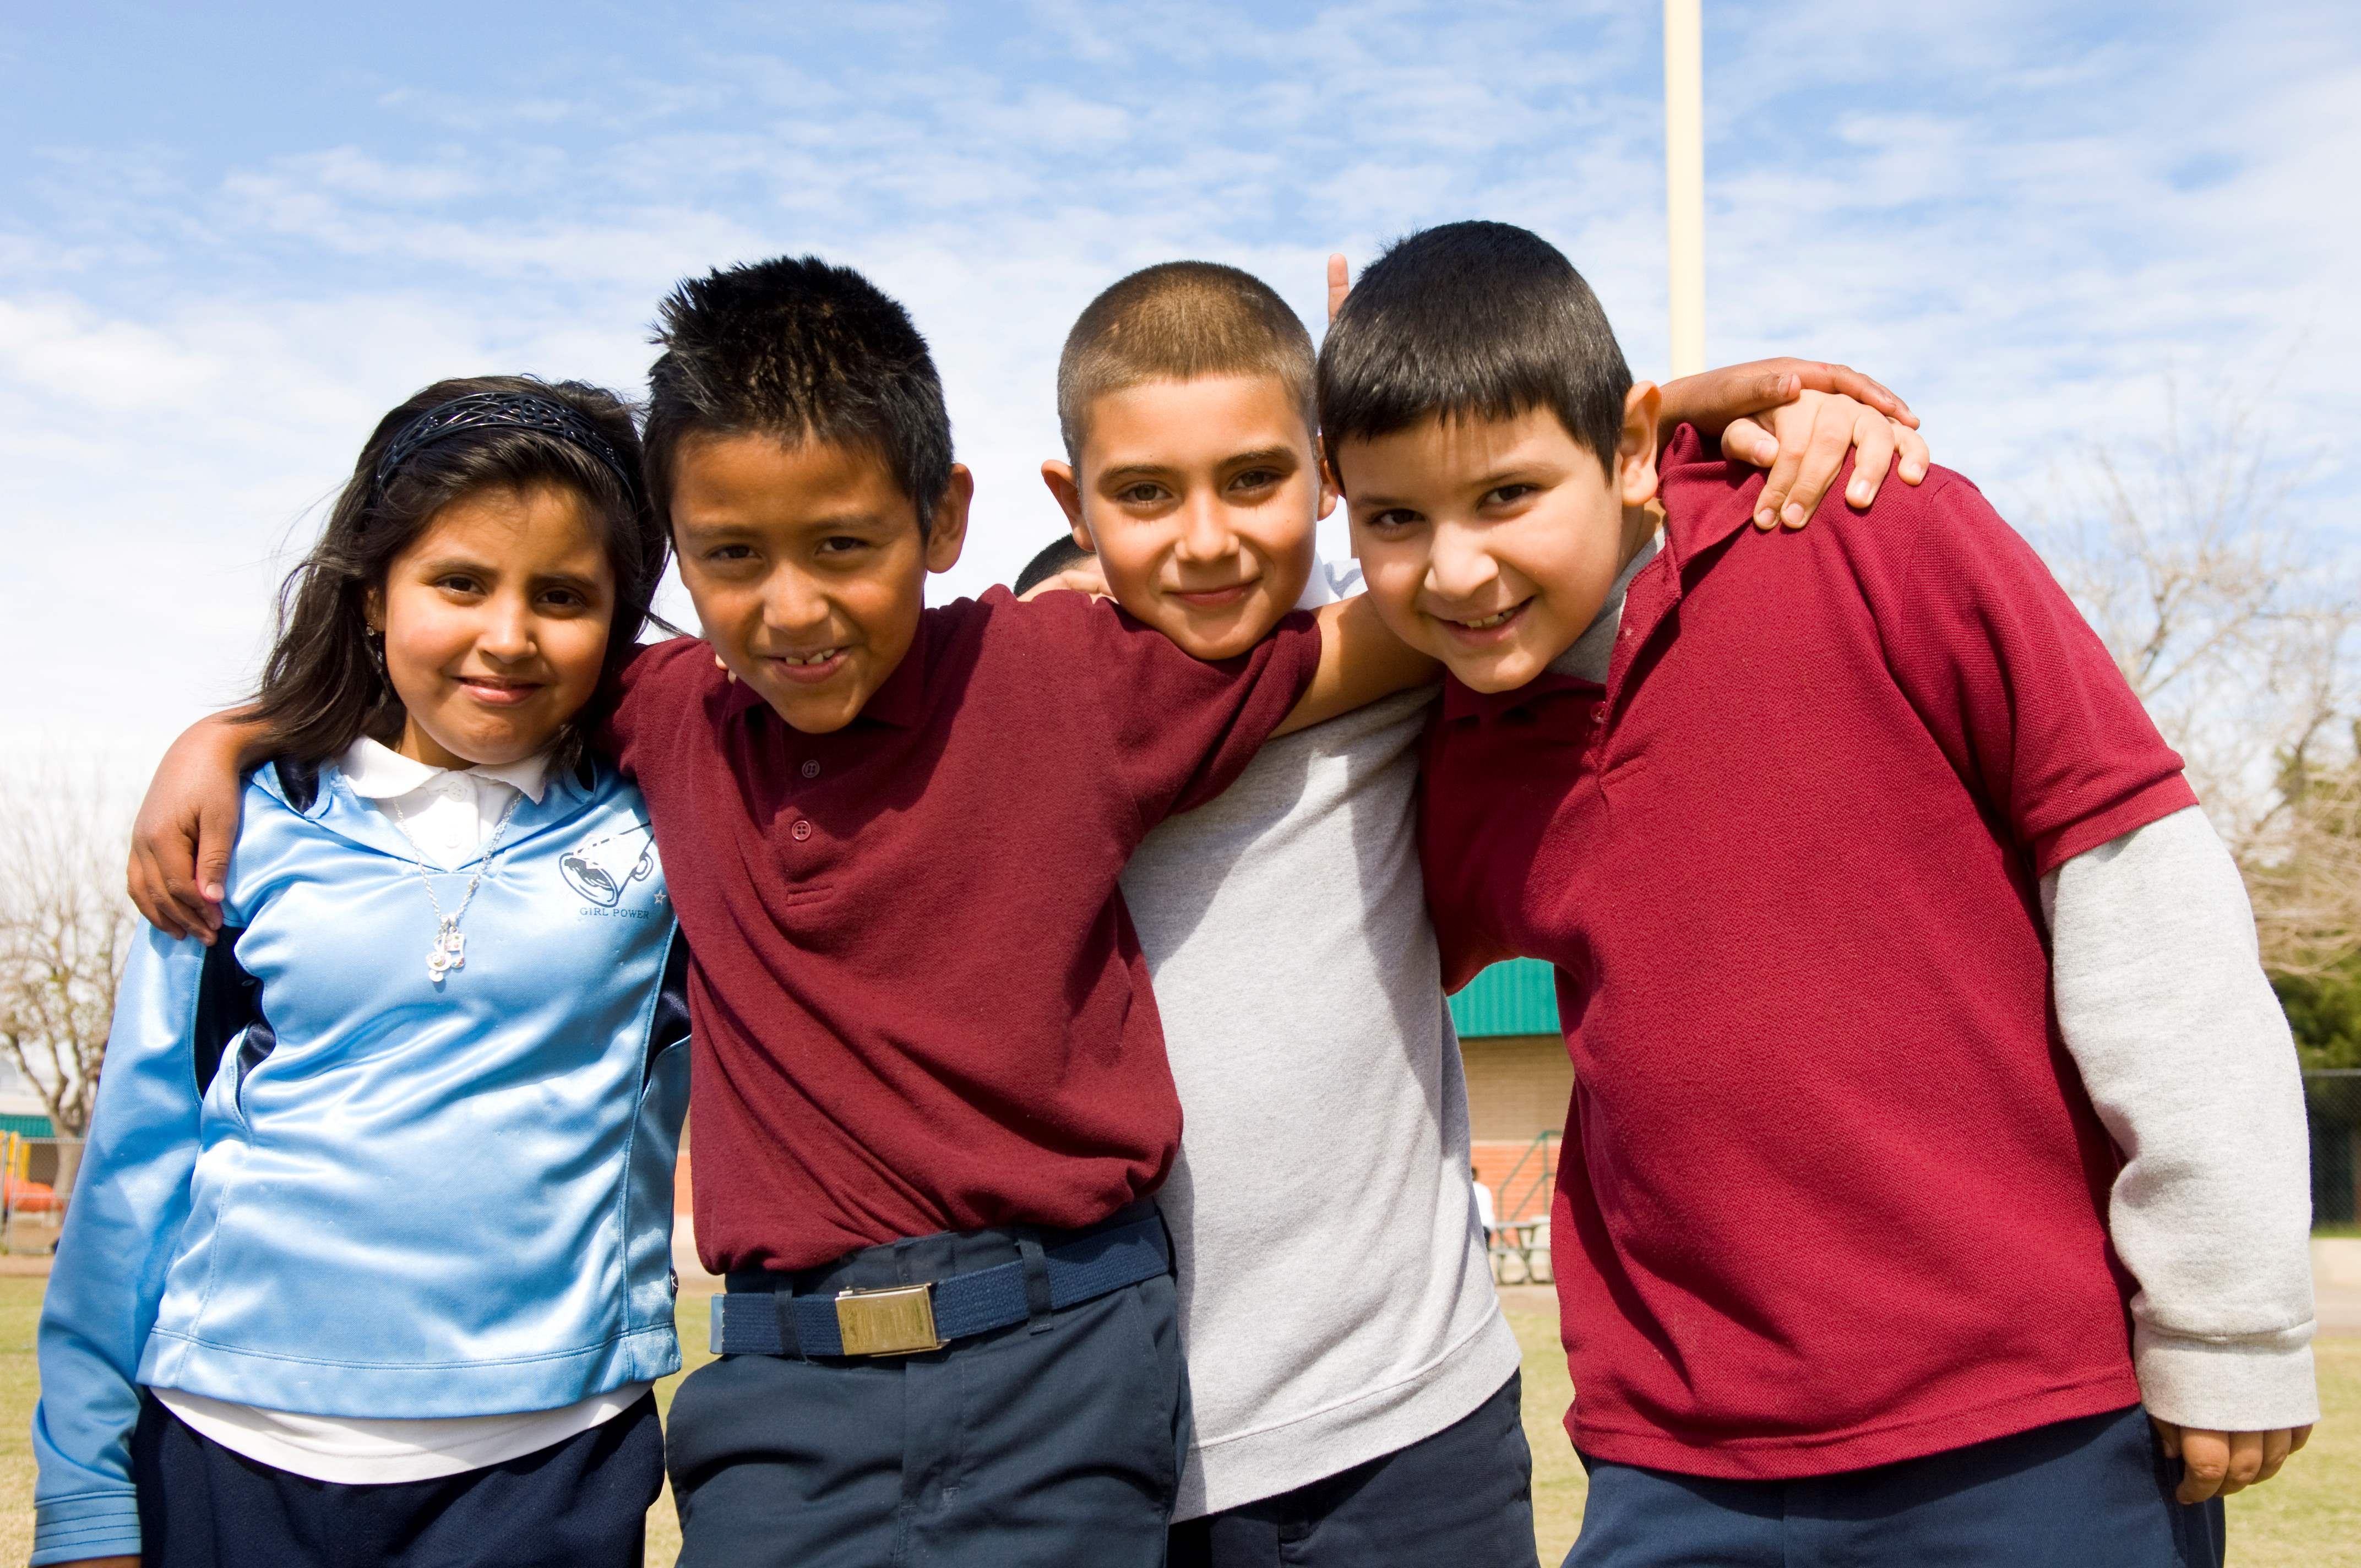 Implementing Restorative Practices - Latinos for Education